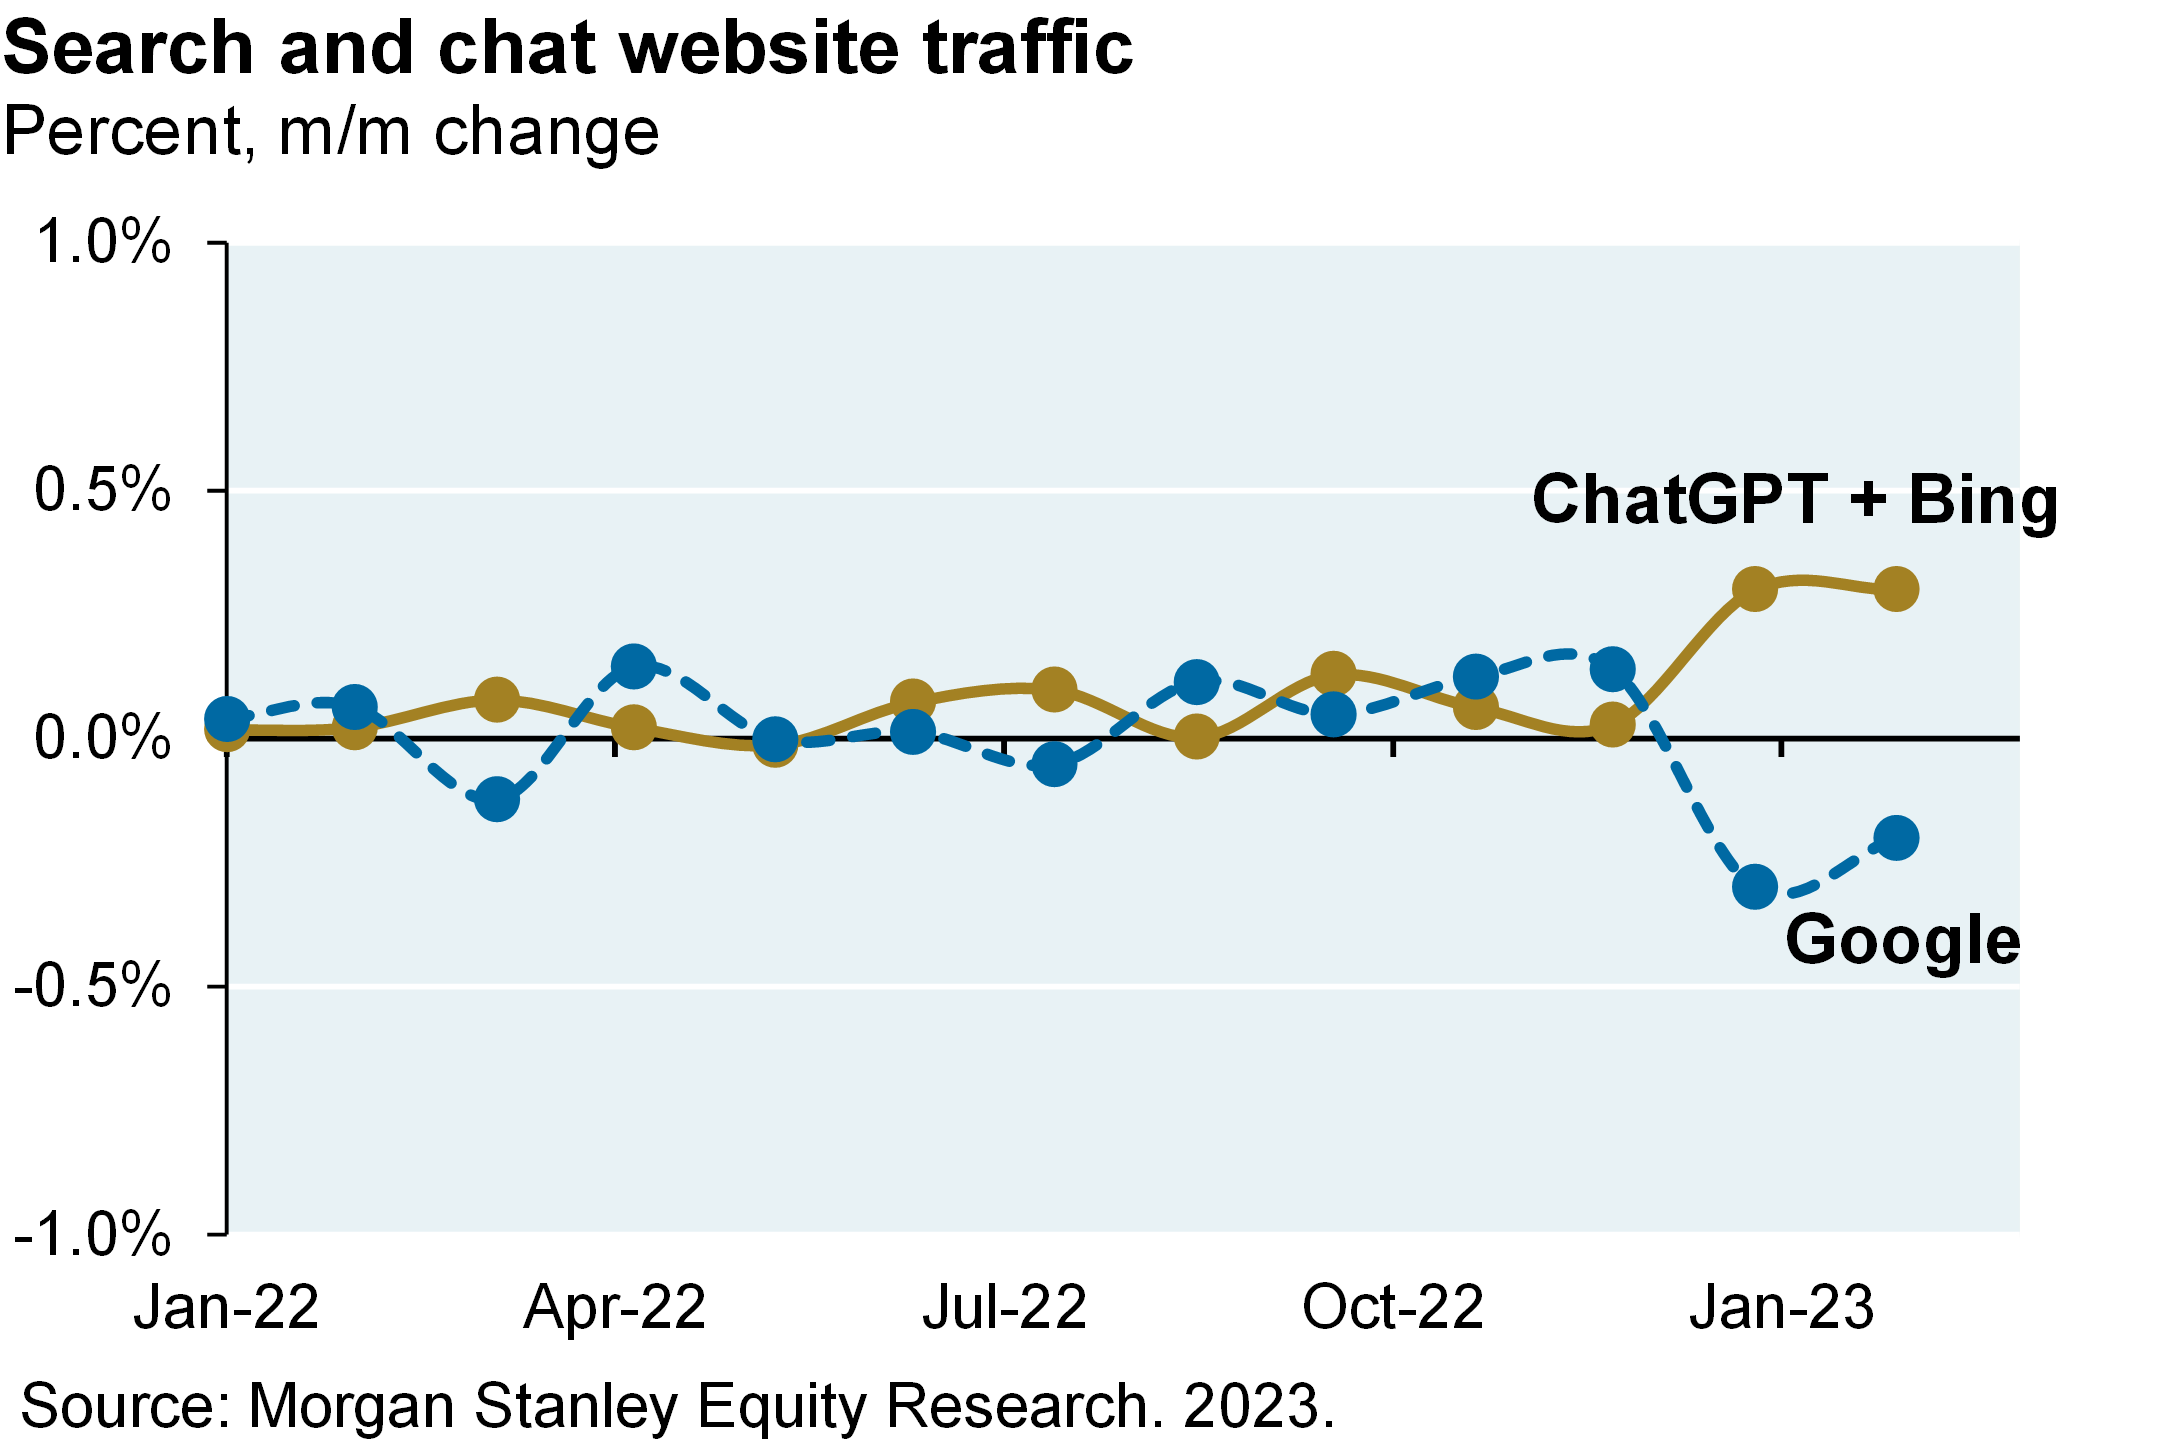 Line chart plots the month-over-month change in search and chat website traffic of Google vs the sum of ChatGPT and Bing from January 2022 to the present. Since the launch of ChatGPT, Google has only seen a -0.3% decline in their share of search and chat website traffic.